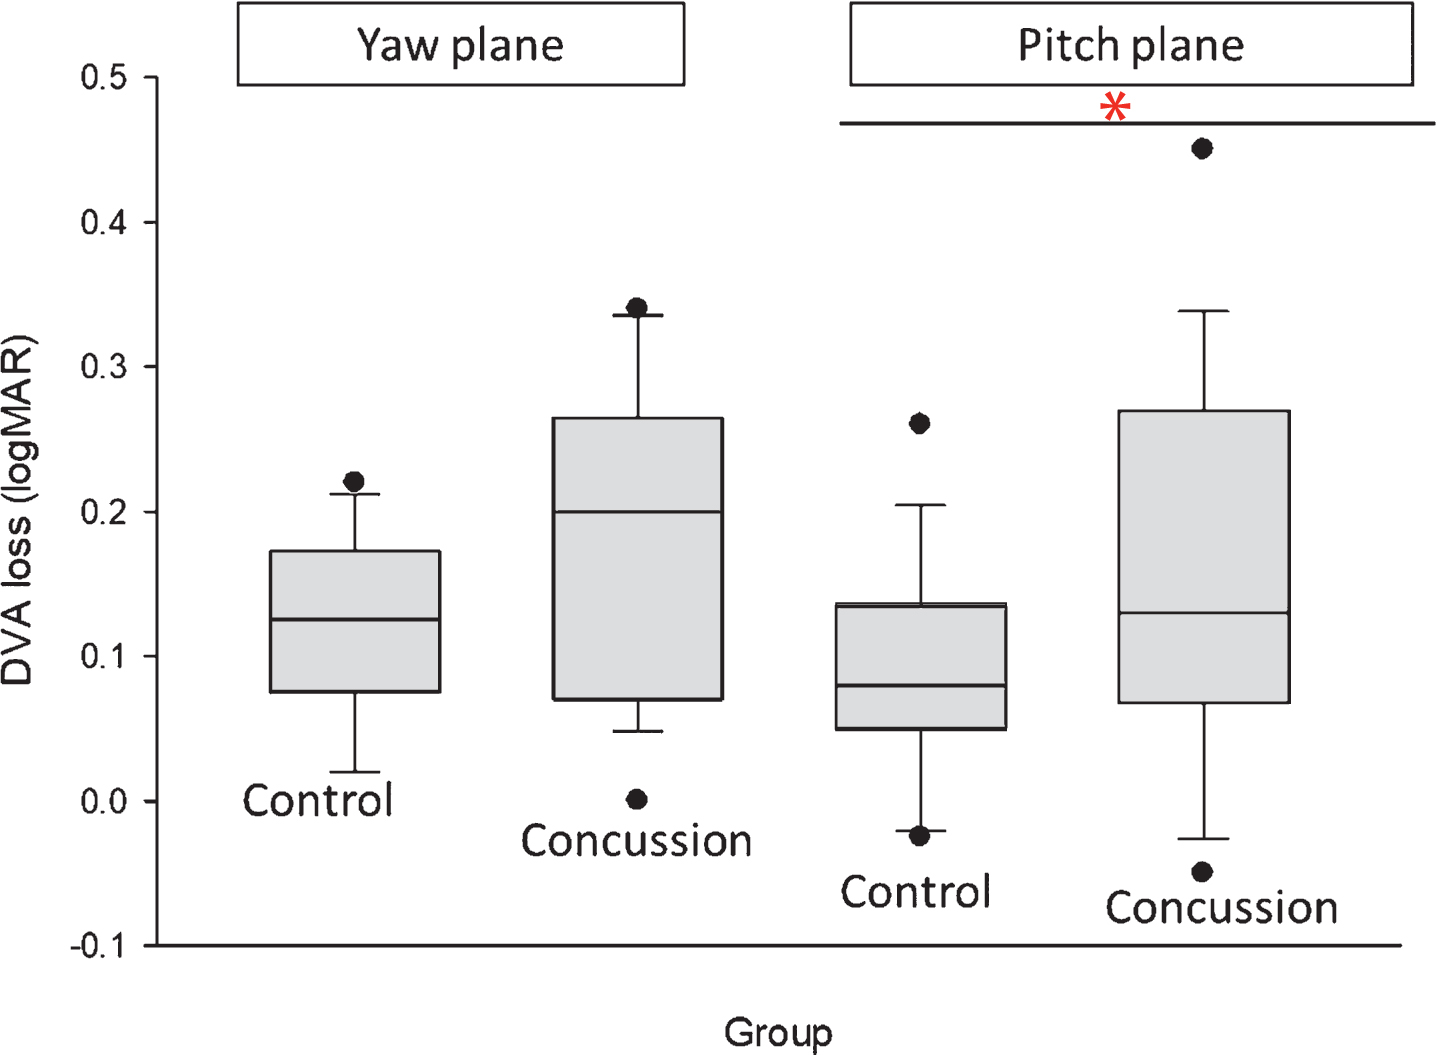 Differences between groups in dynamic visual acuity loss in the yaw and pitch planes. DVA loss is measured in logMAR values. Significant differences between groups is indicated by * (p = 0.04), DVA – dynamic visual acuity.